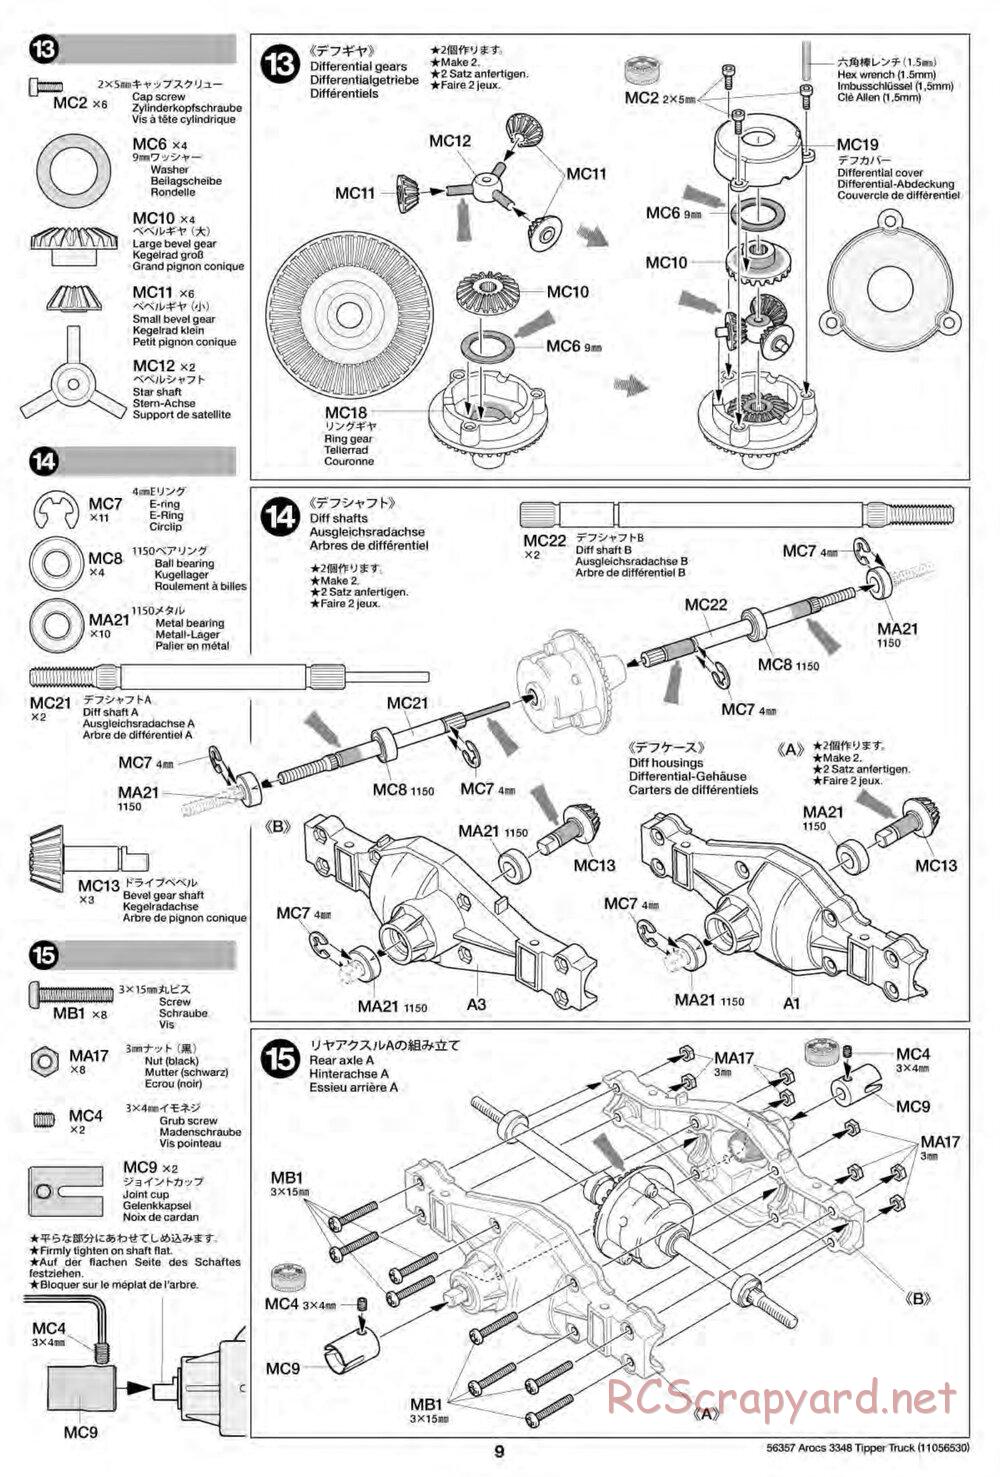 Tamiya - Mercedes-Benz Arocs 3348 6x4 Tipper Truck Chassis - Manual - Page 9